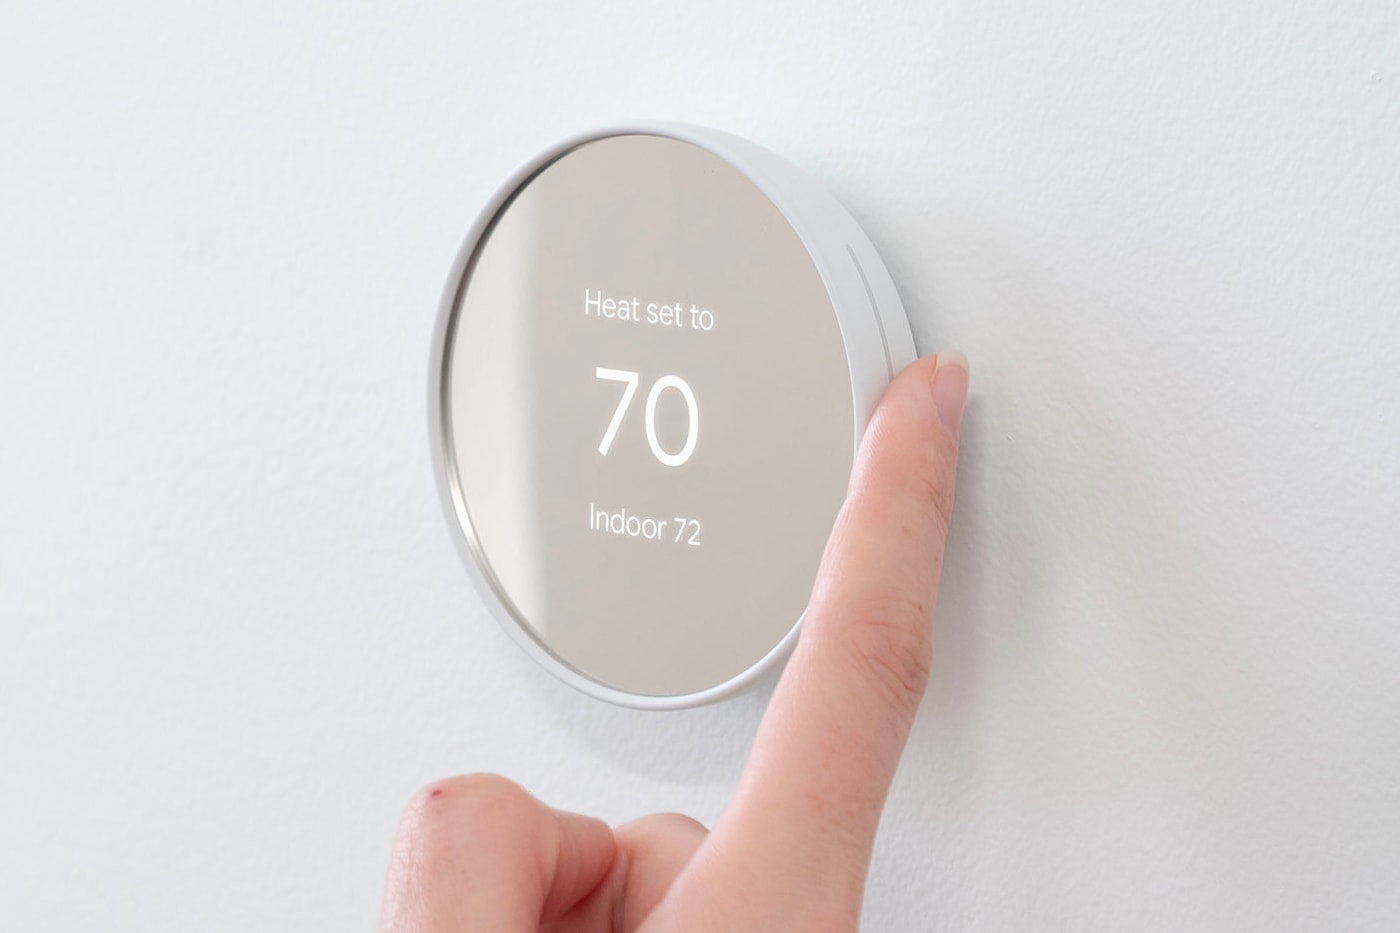 Google Nest Minimal Redesign Smart Thermostat temperature google smart home app eco mode schedule device technology 